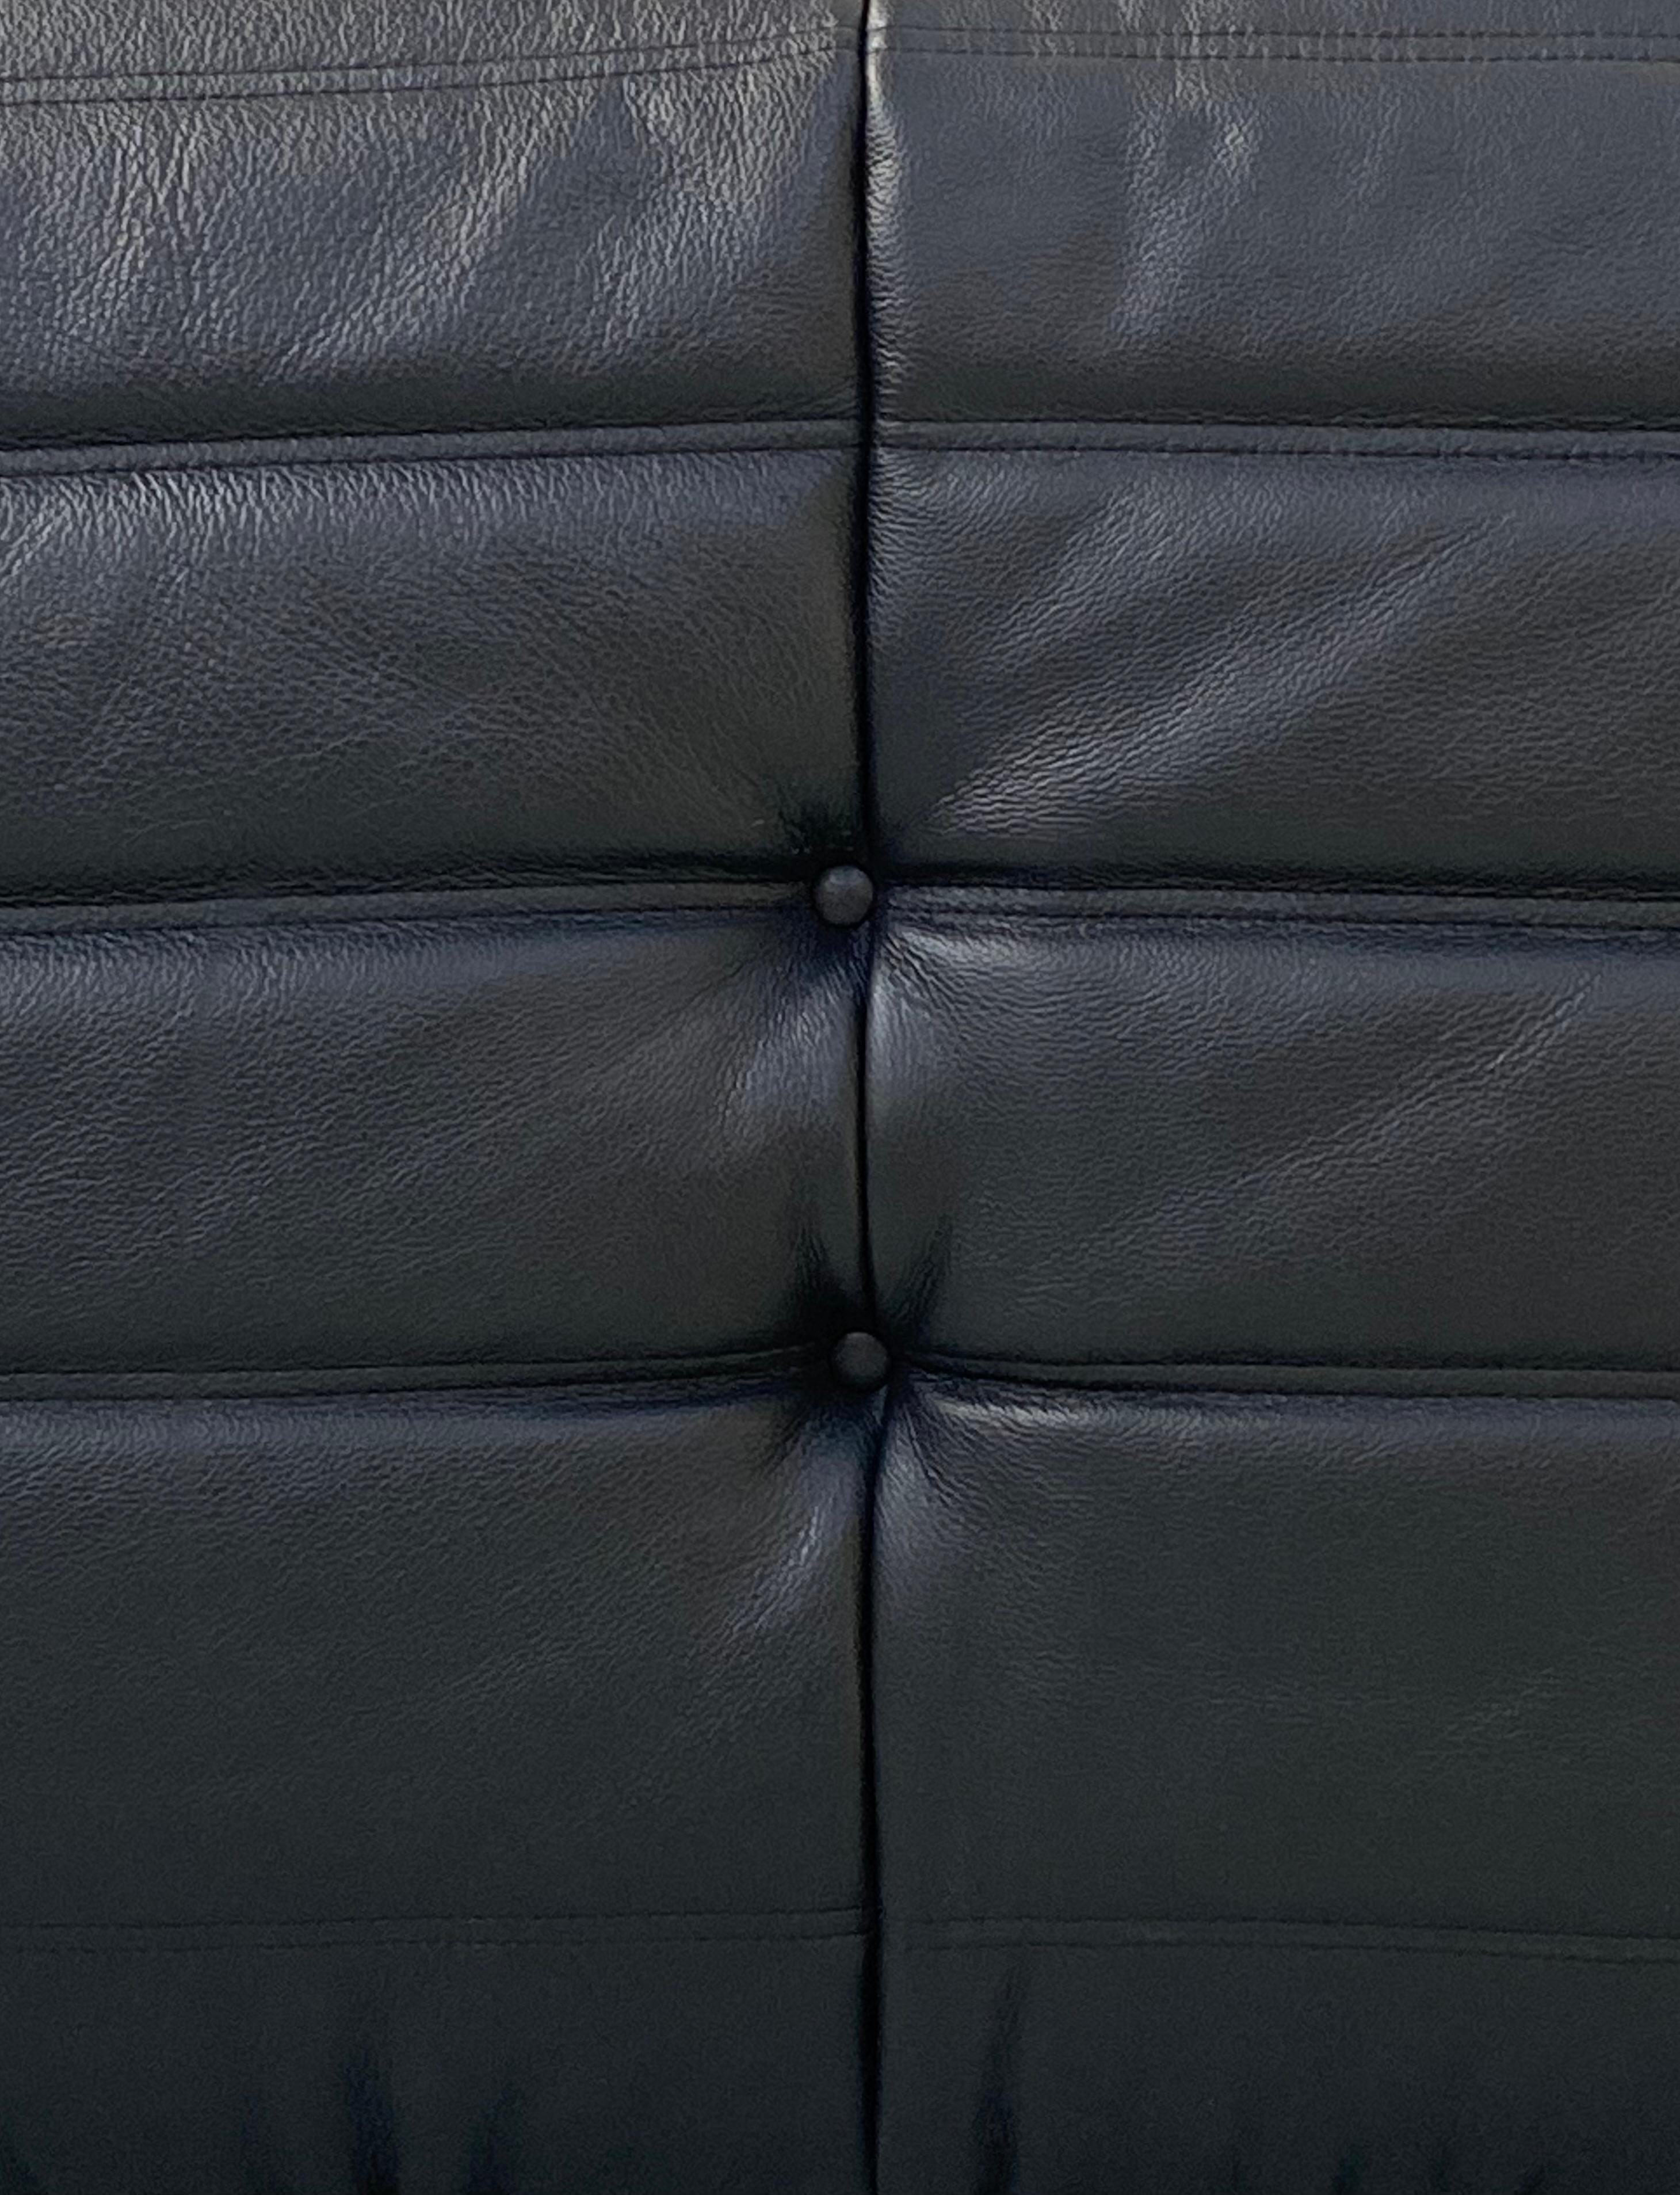 French Togo Sofa in Black Leather by Michel Ducaroy for Ligne Roset. For Sale 4